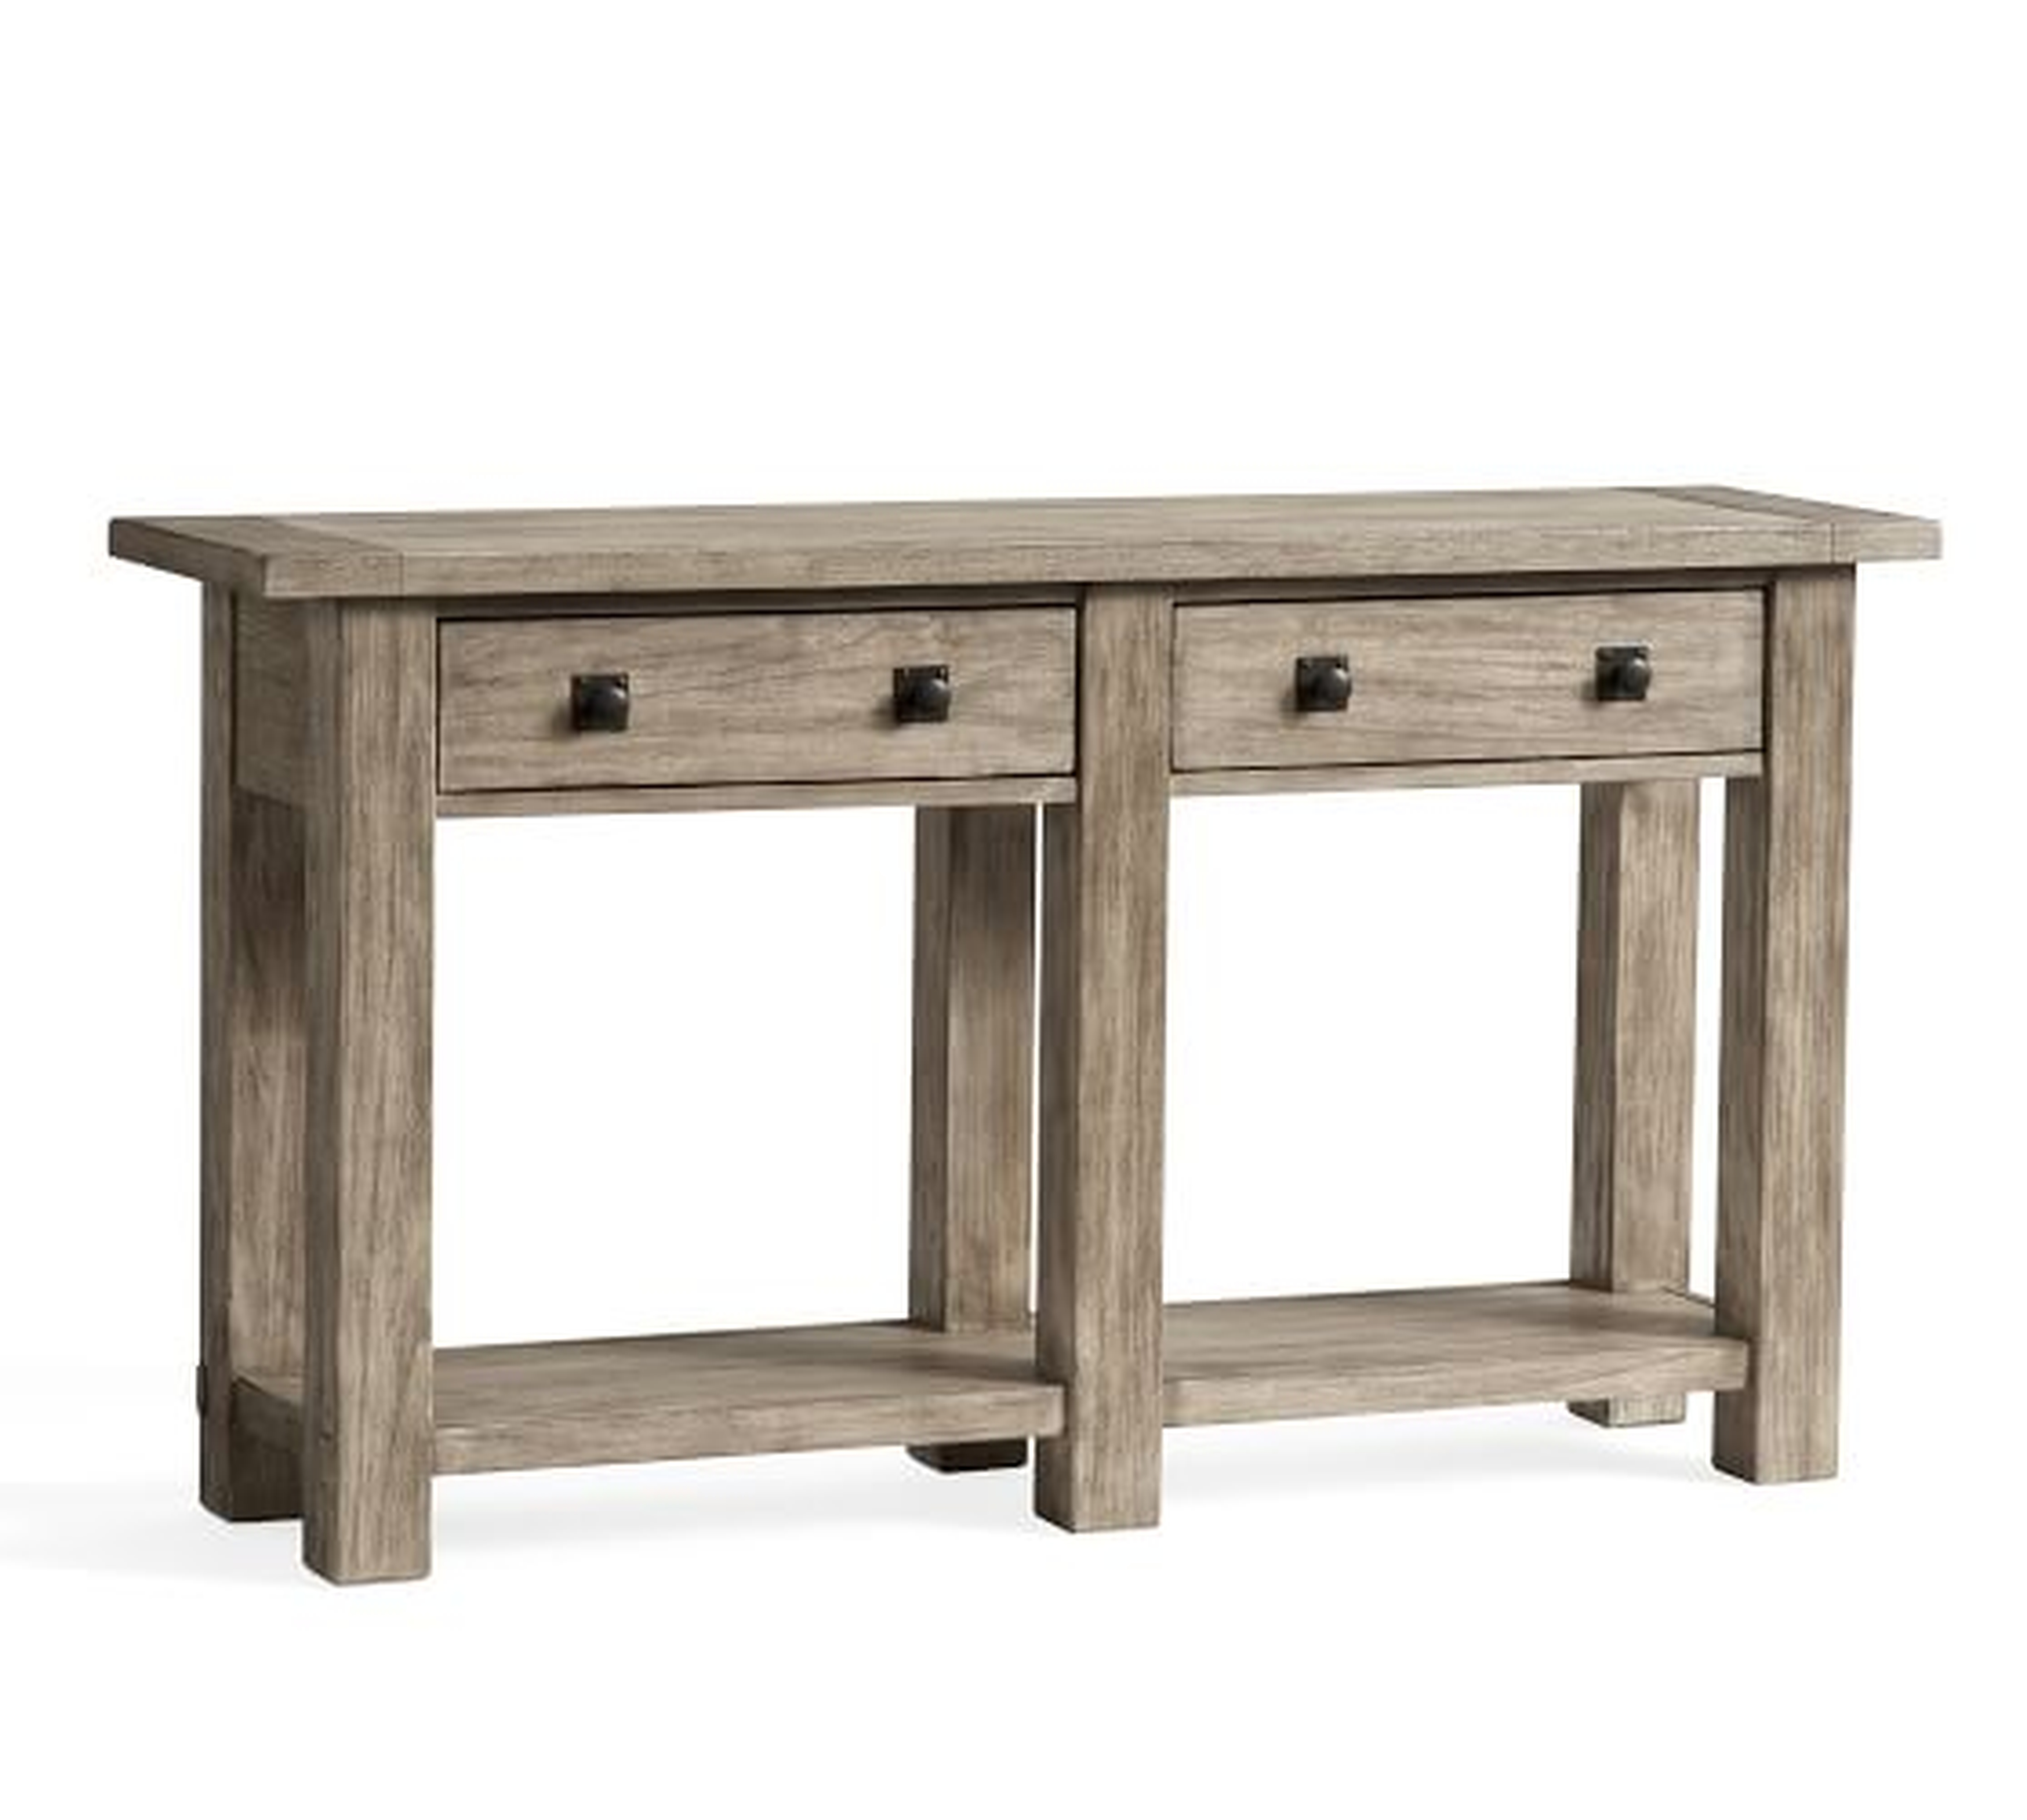 Benchwright 54" Wood Console Table with Drawers, Gray Wash - Pottery Barn